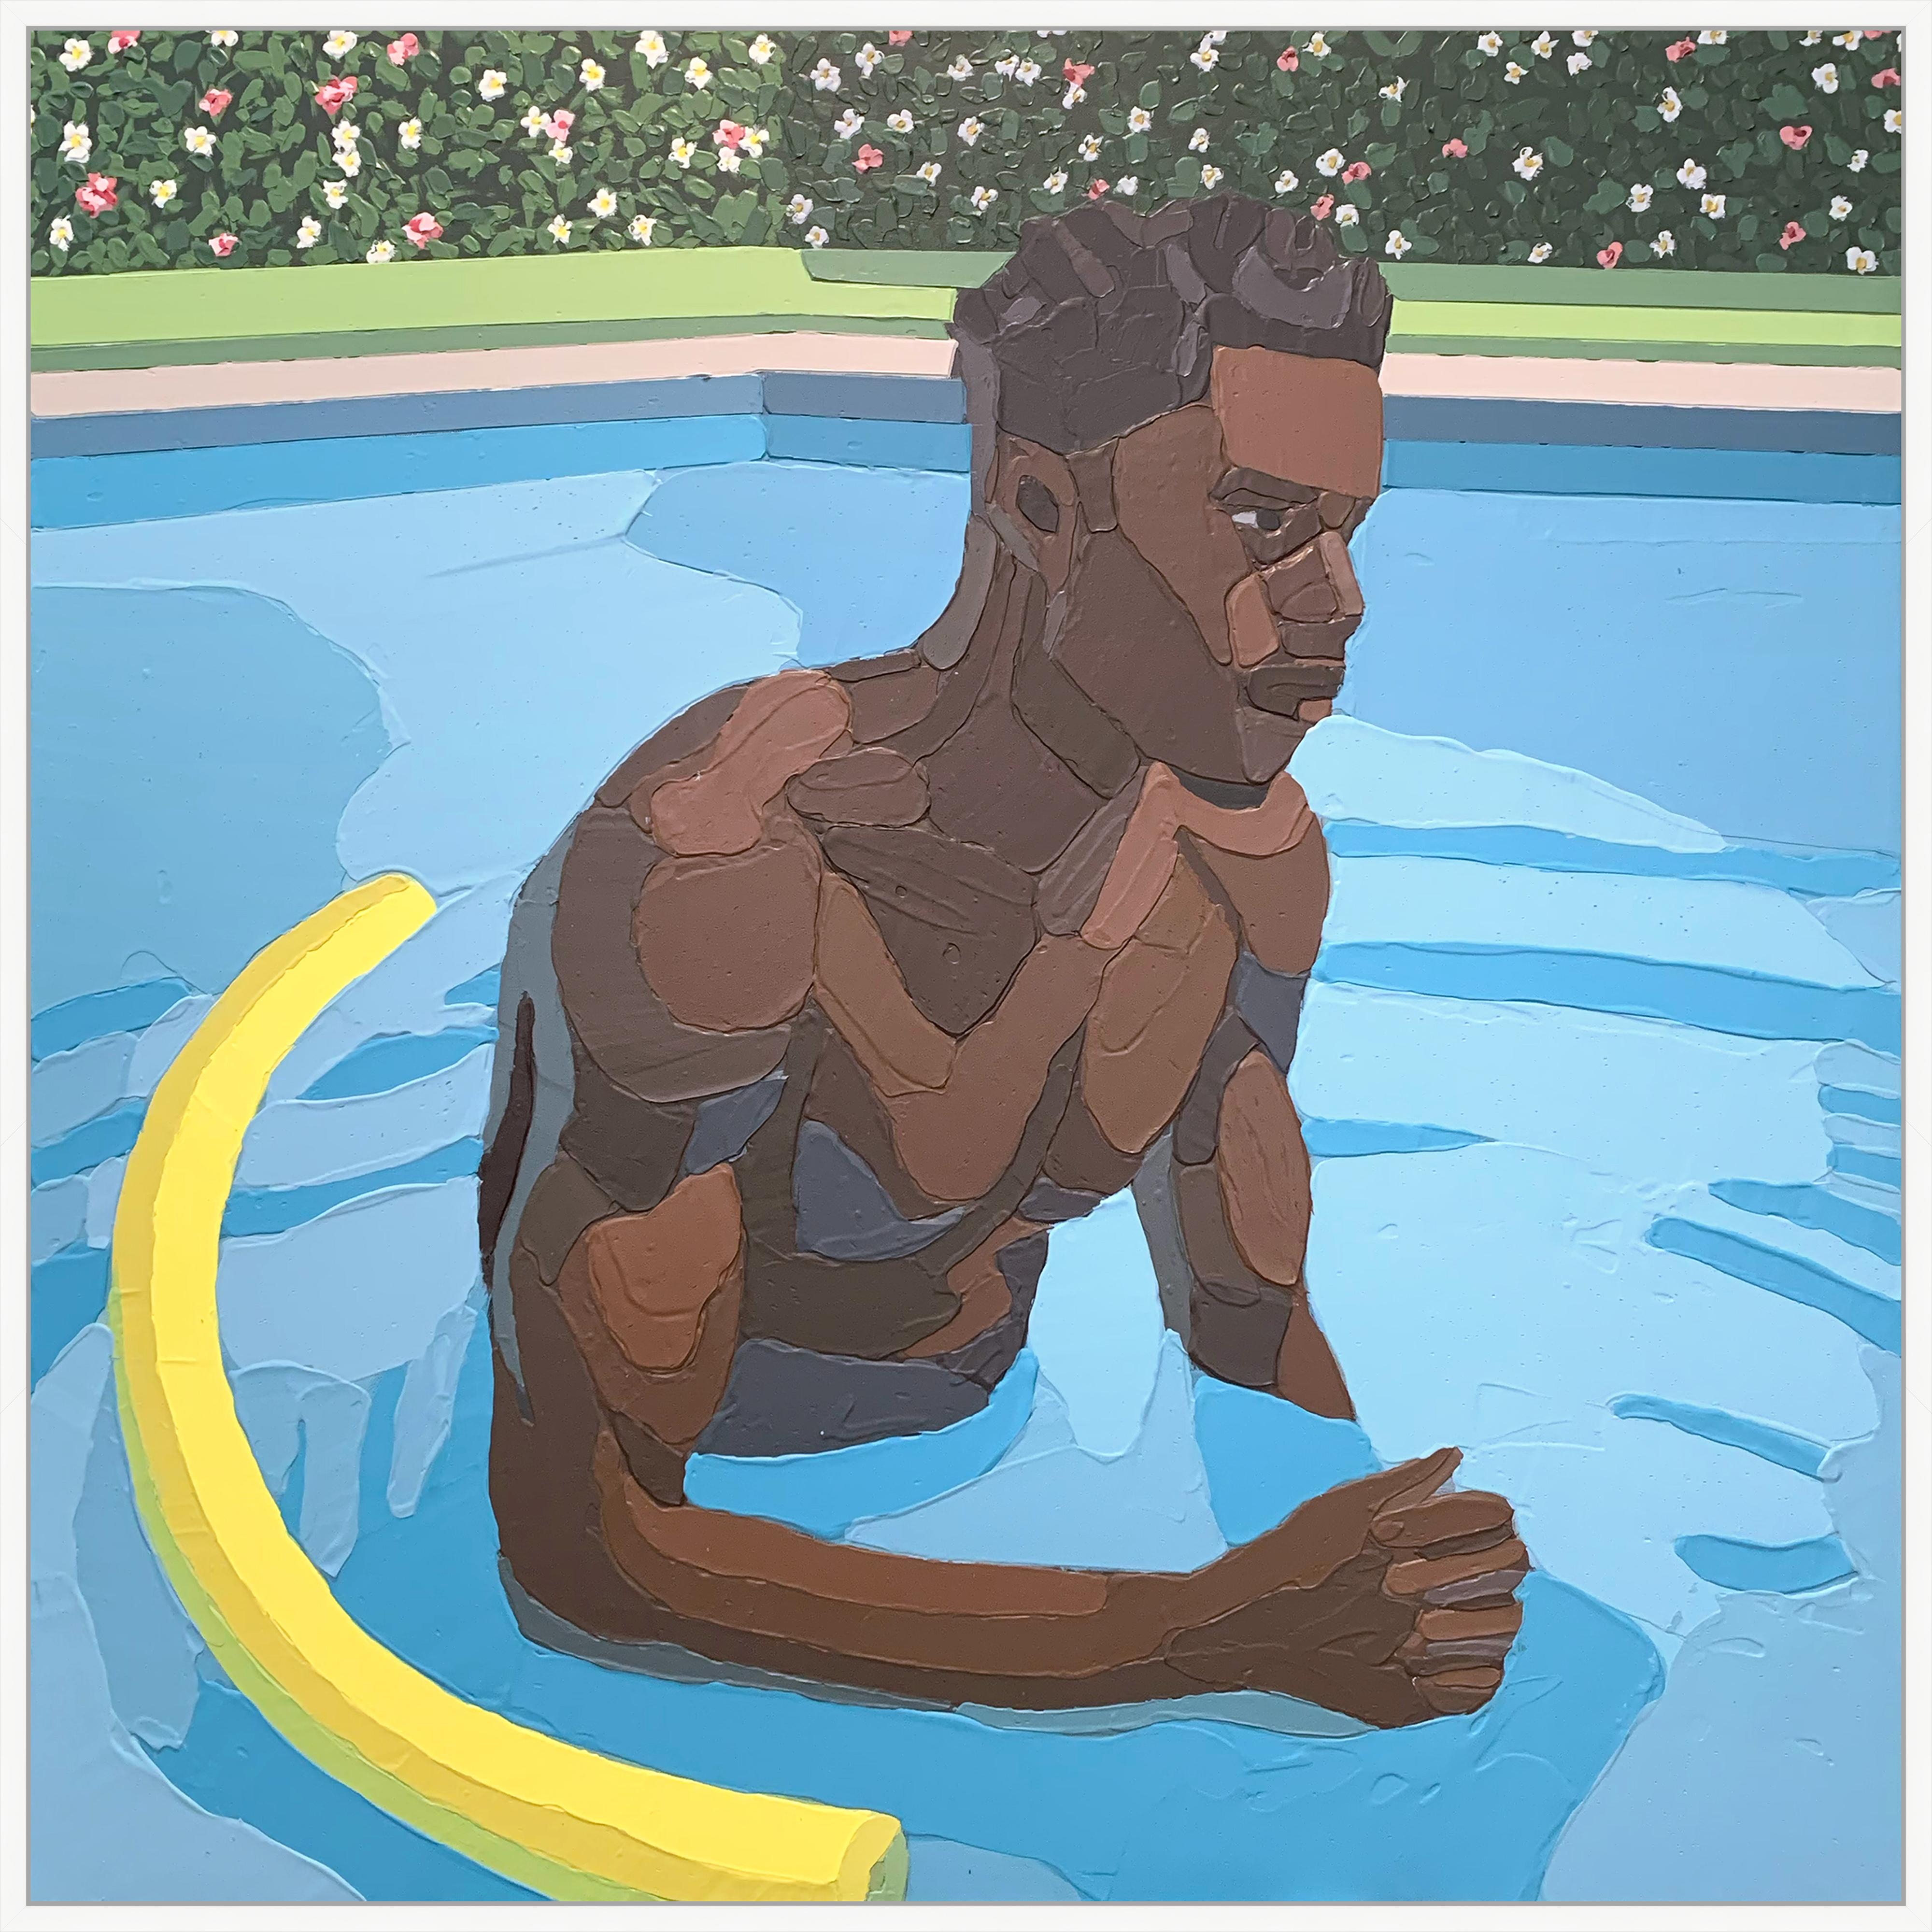 Andrew Gray Figurative Painting - "Unbound" - Original Acrylic Painting featuring a Male Model in a Pool